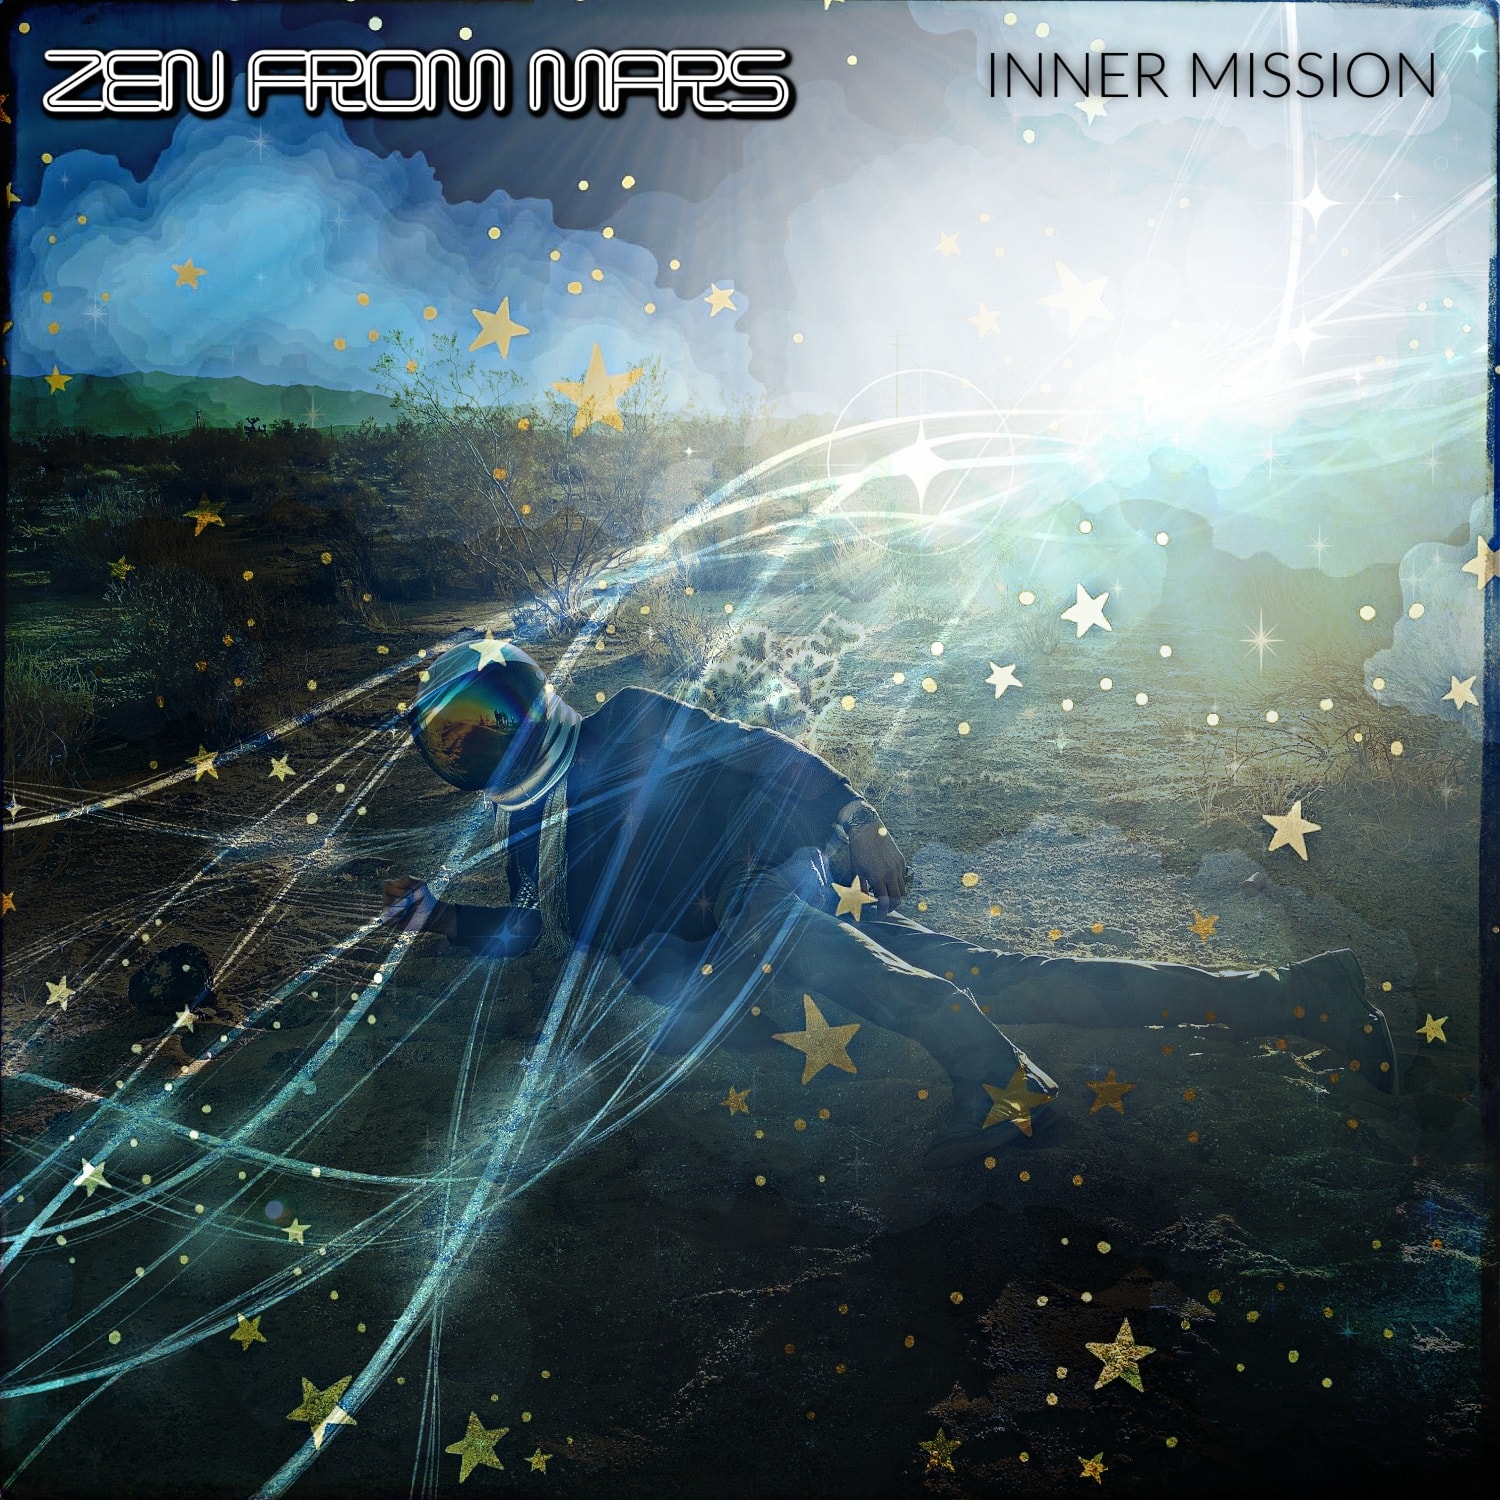 Track by Track: Inner Mission by Zen from Mars